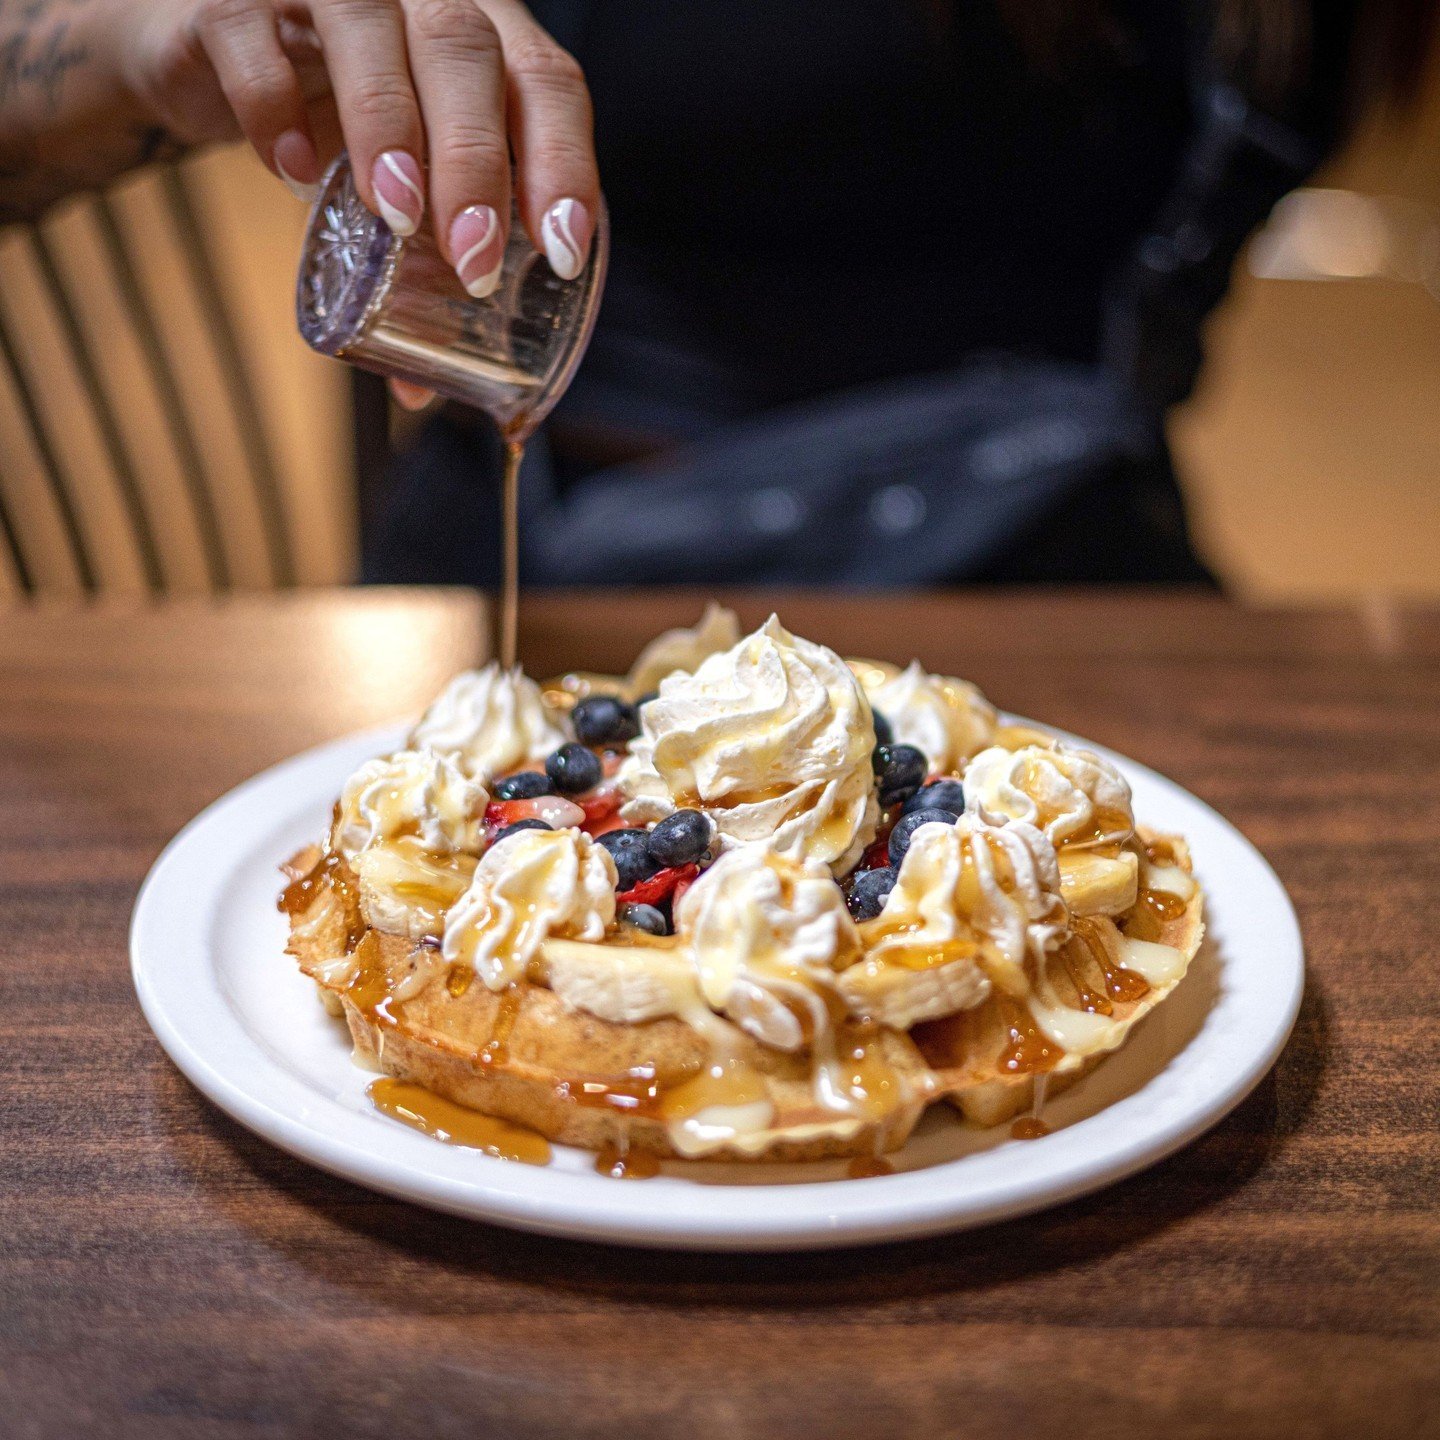 That syrup is calling my name.🤤 ⁠
⁠
#wecks #wecksnm #nm #newmexico #nmtrue #local #eatlocal #belgianfruitwaffle #breakfast #foodie #brunch #lunch #igoftheday